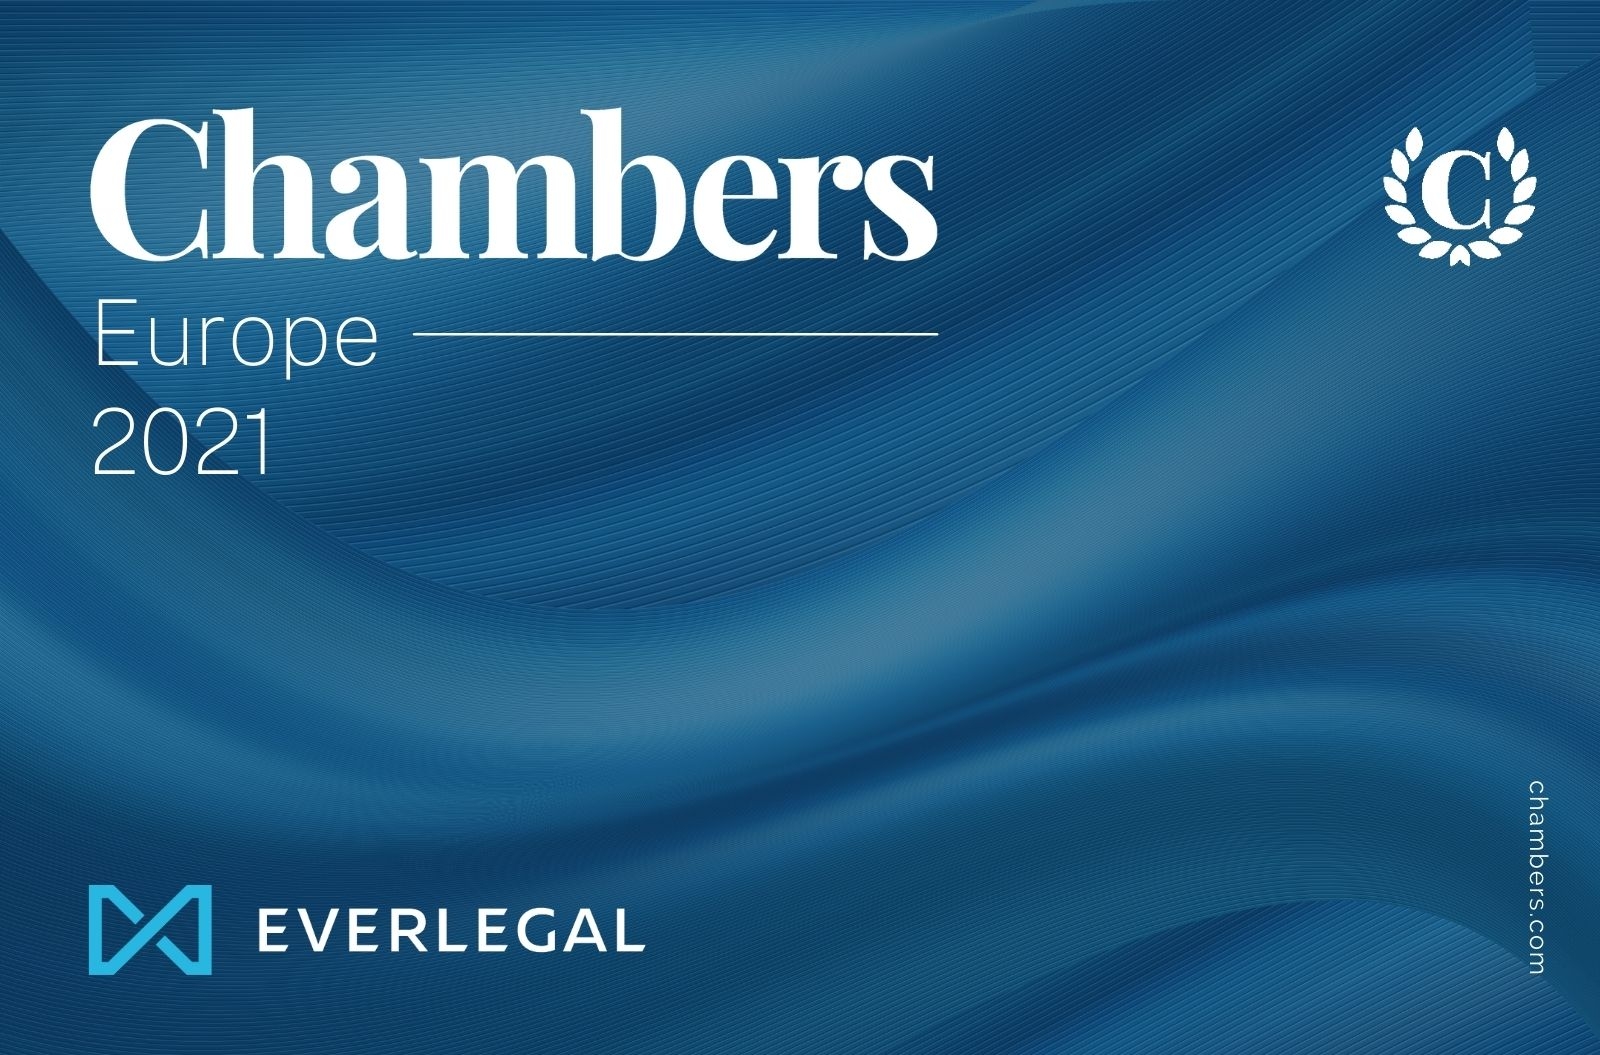 EVERLEGAL ranked by Chambers Europe 2021